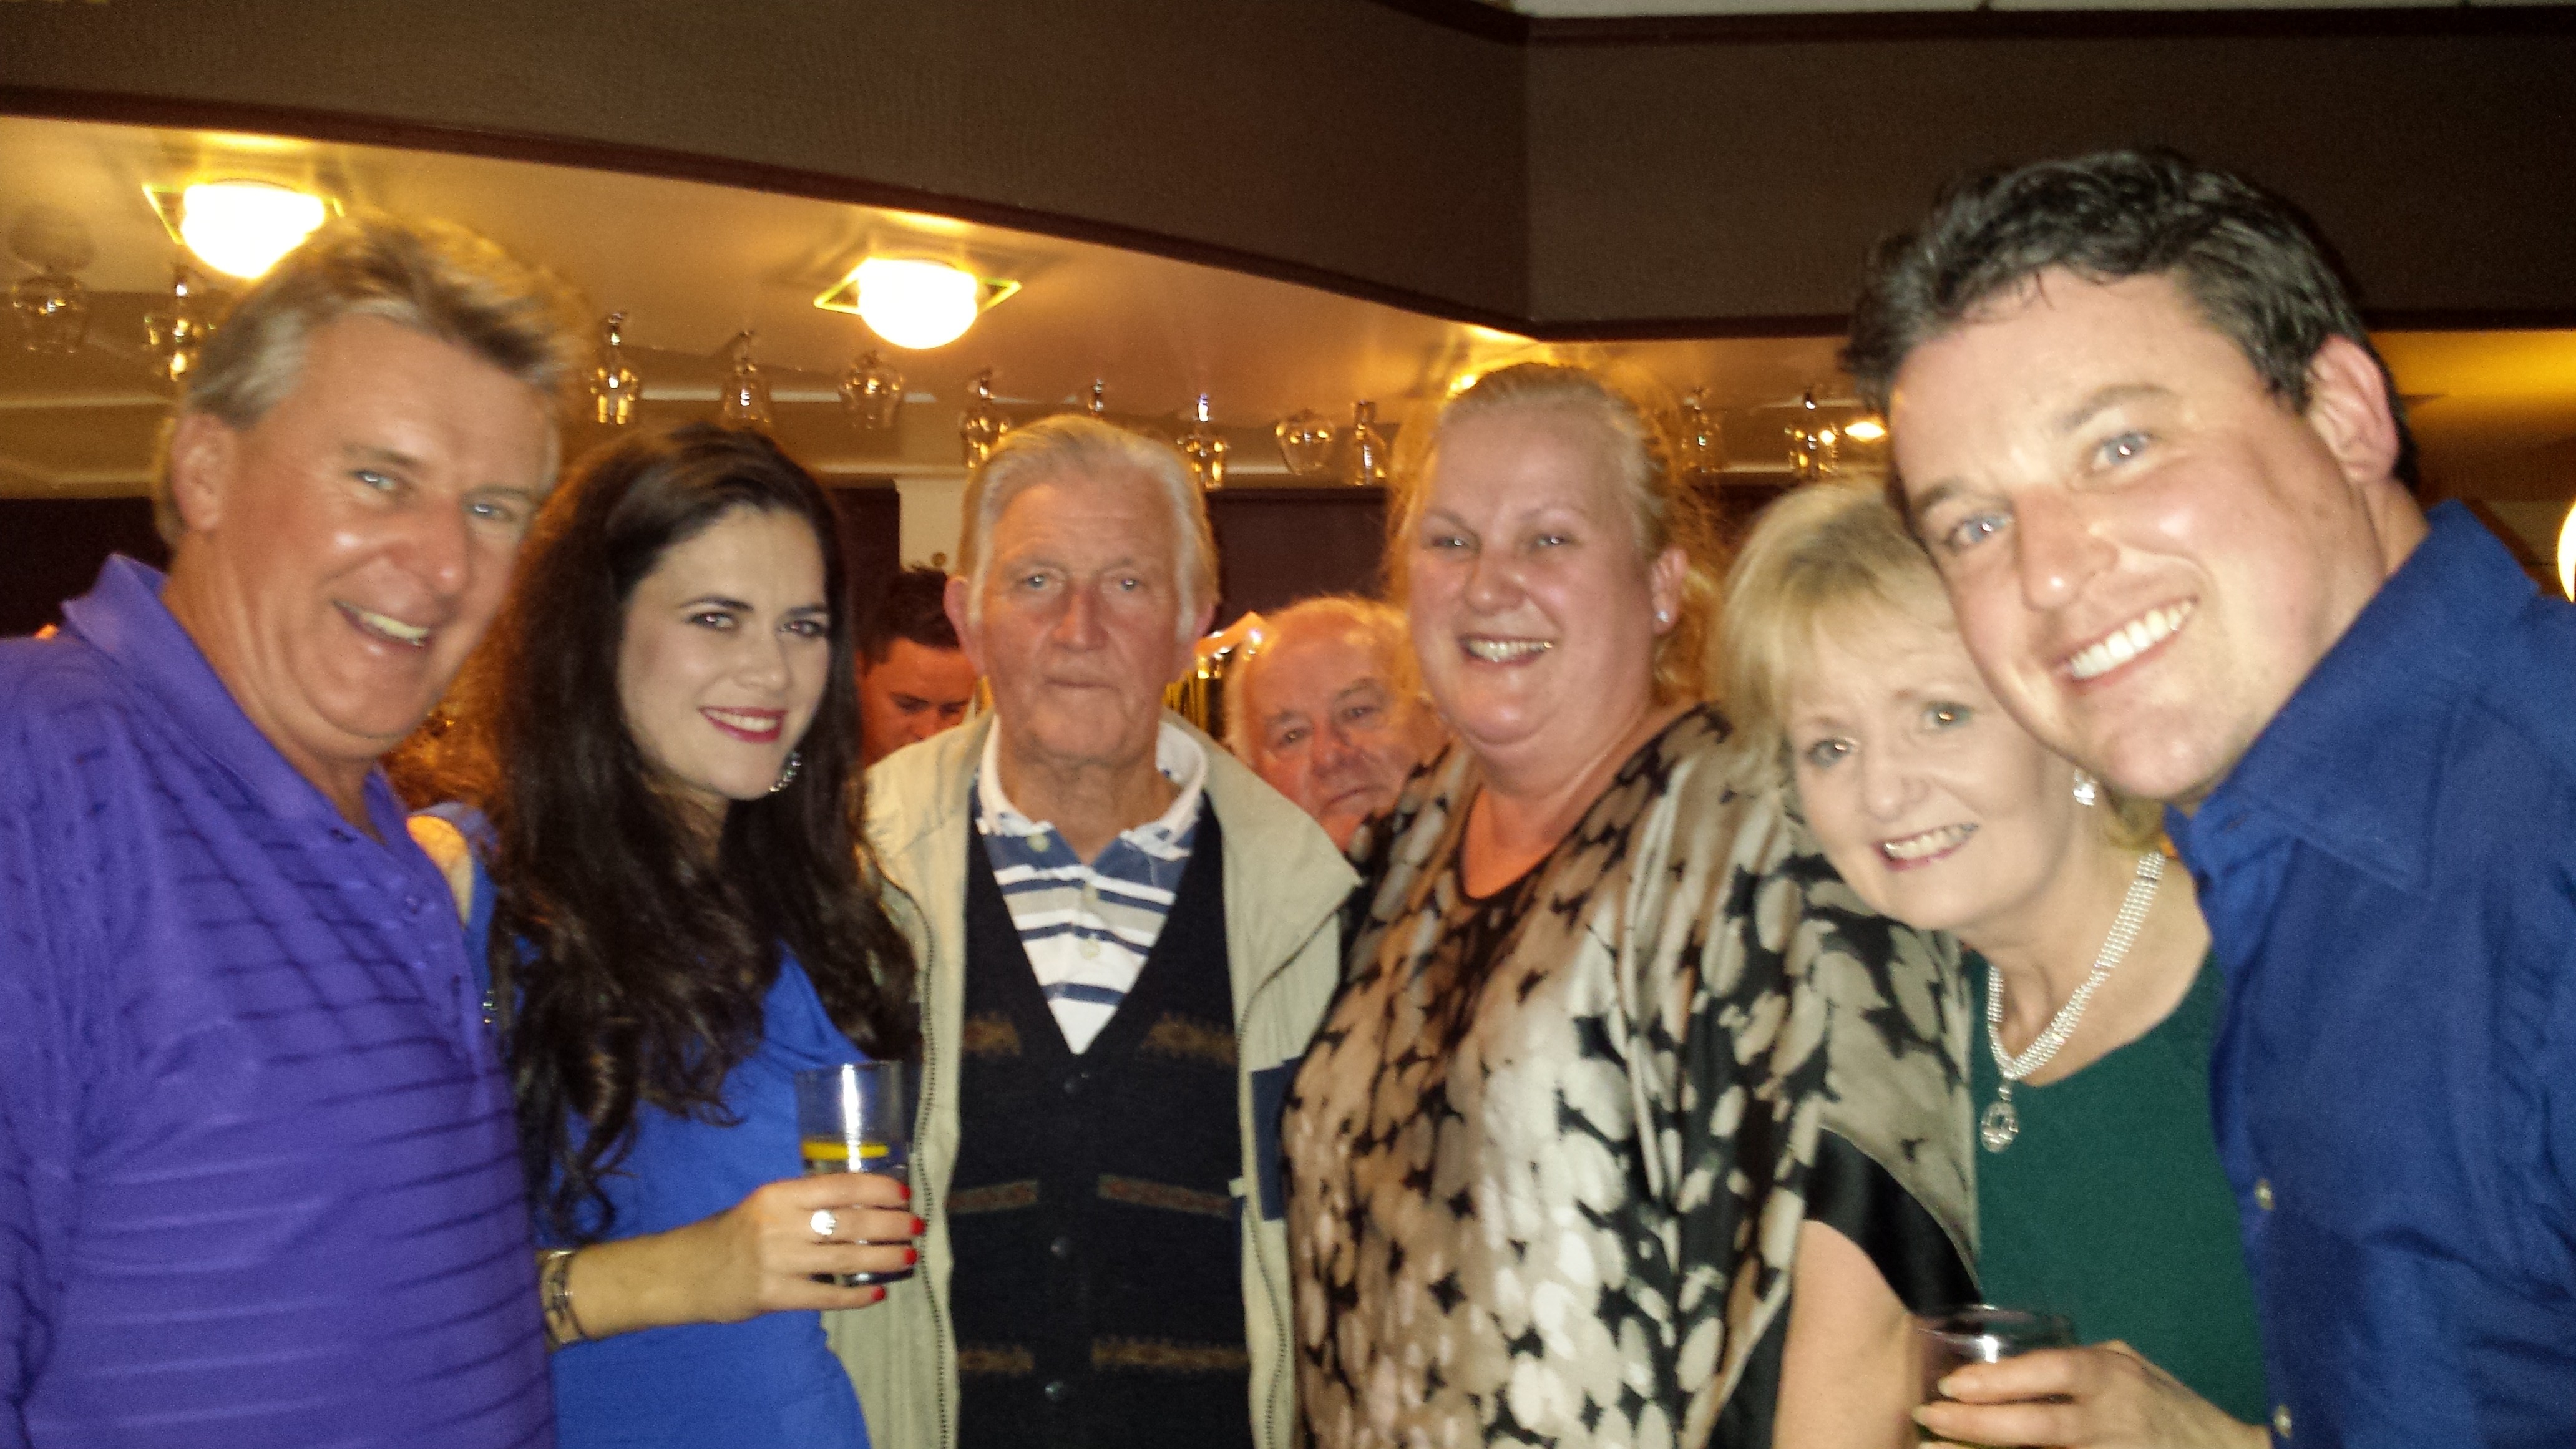 Brian Walsh (Writer / Producer), Norah King, Jack Conroy (Director / DOP), Edwina Forkin (Producer), Annette Walsh (Agent @ Castannettenow) and Declan Reynolds at THE GAELIC CURSE wrap party, Monasterevin, Co. Kildare.